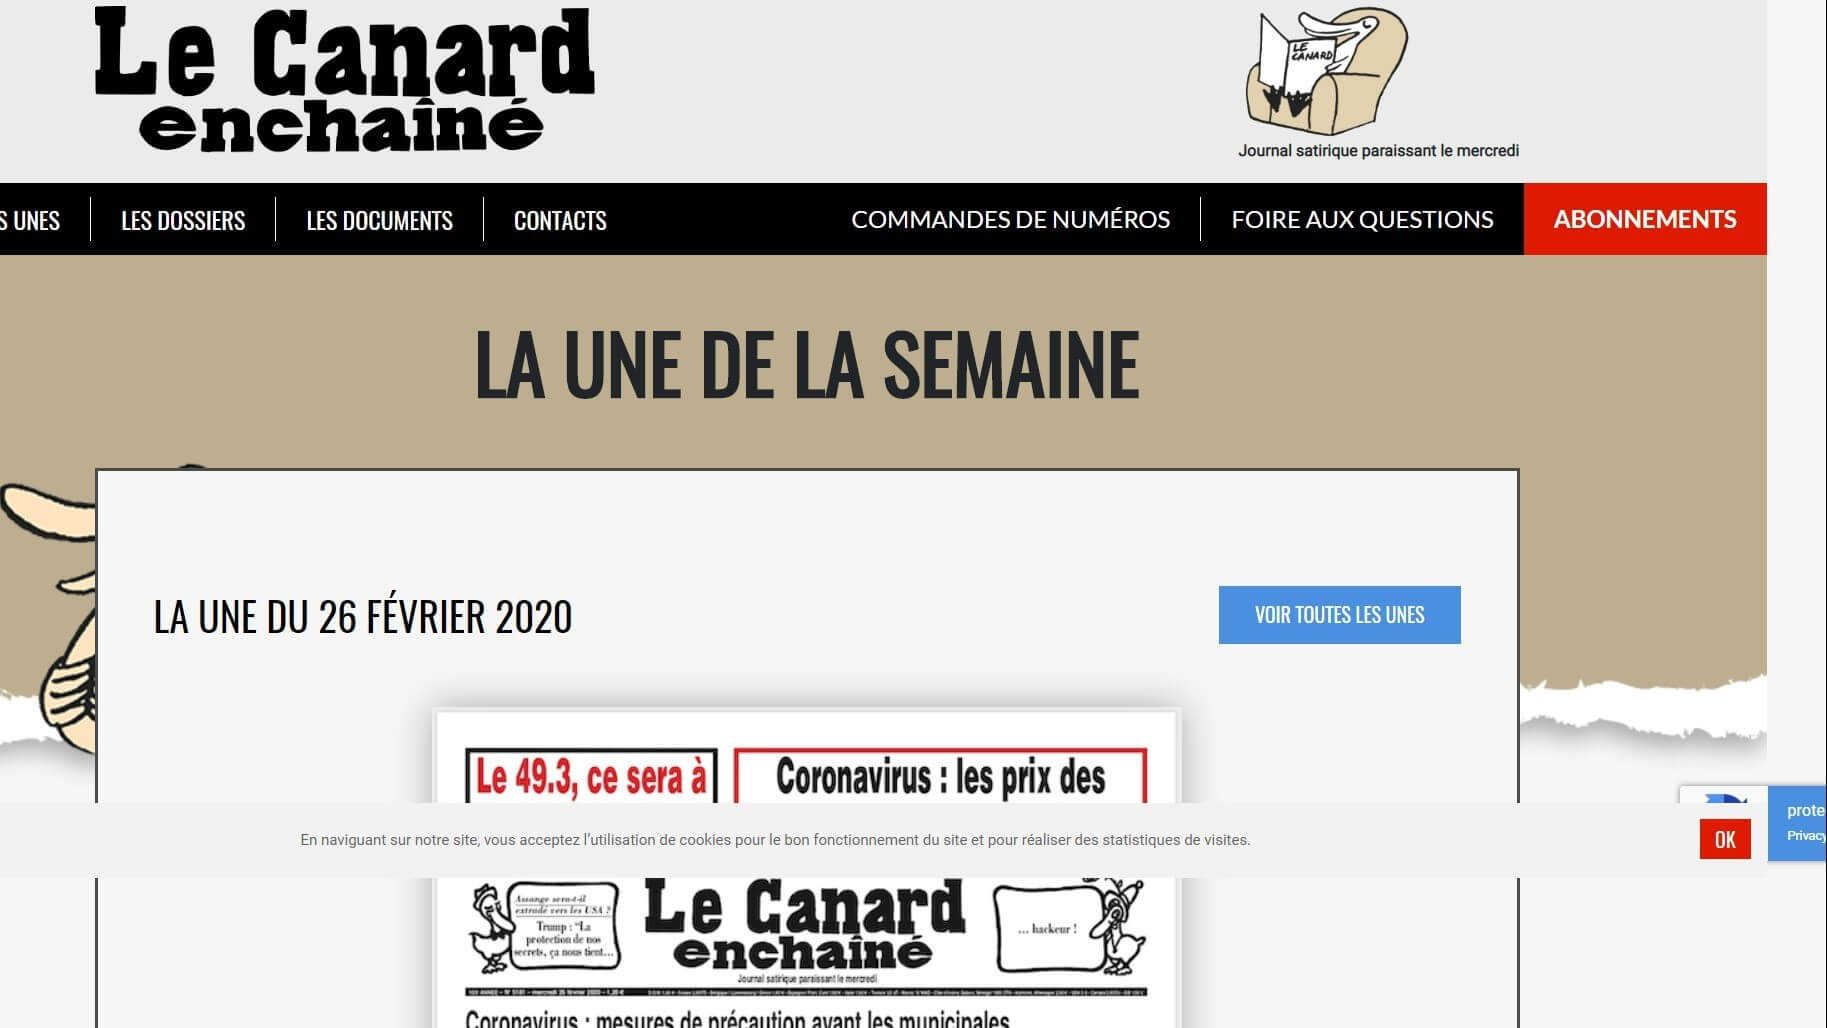 france newspapers 9 Le Canard enchaine website